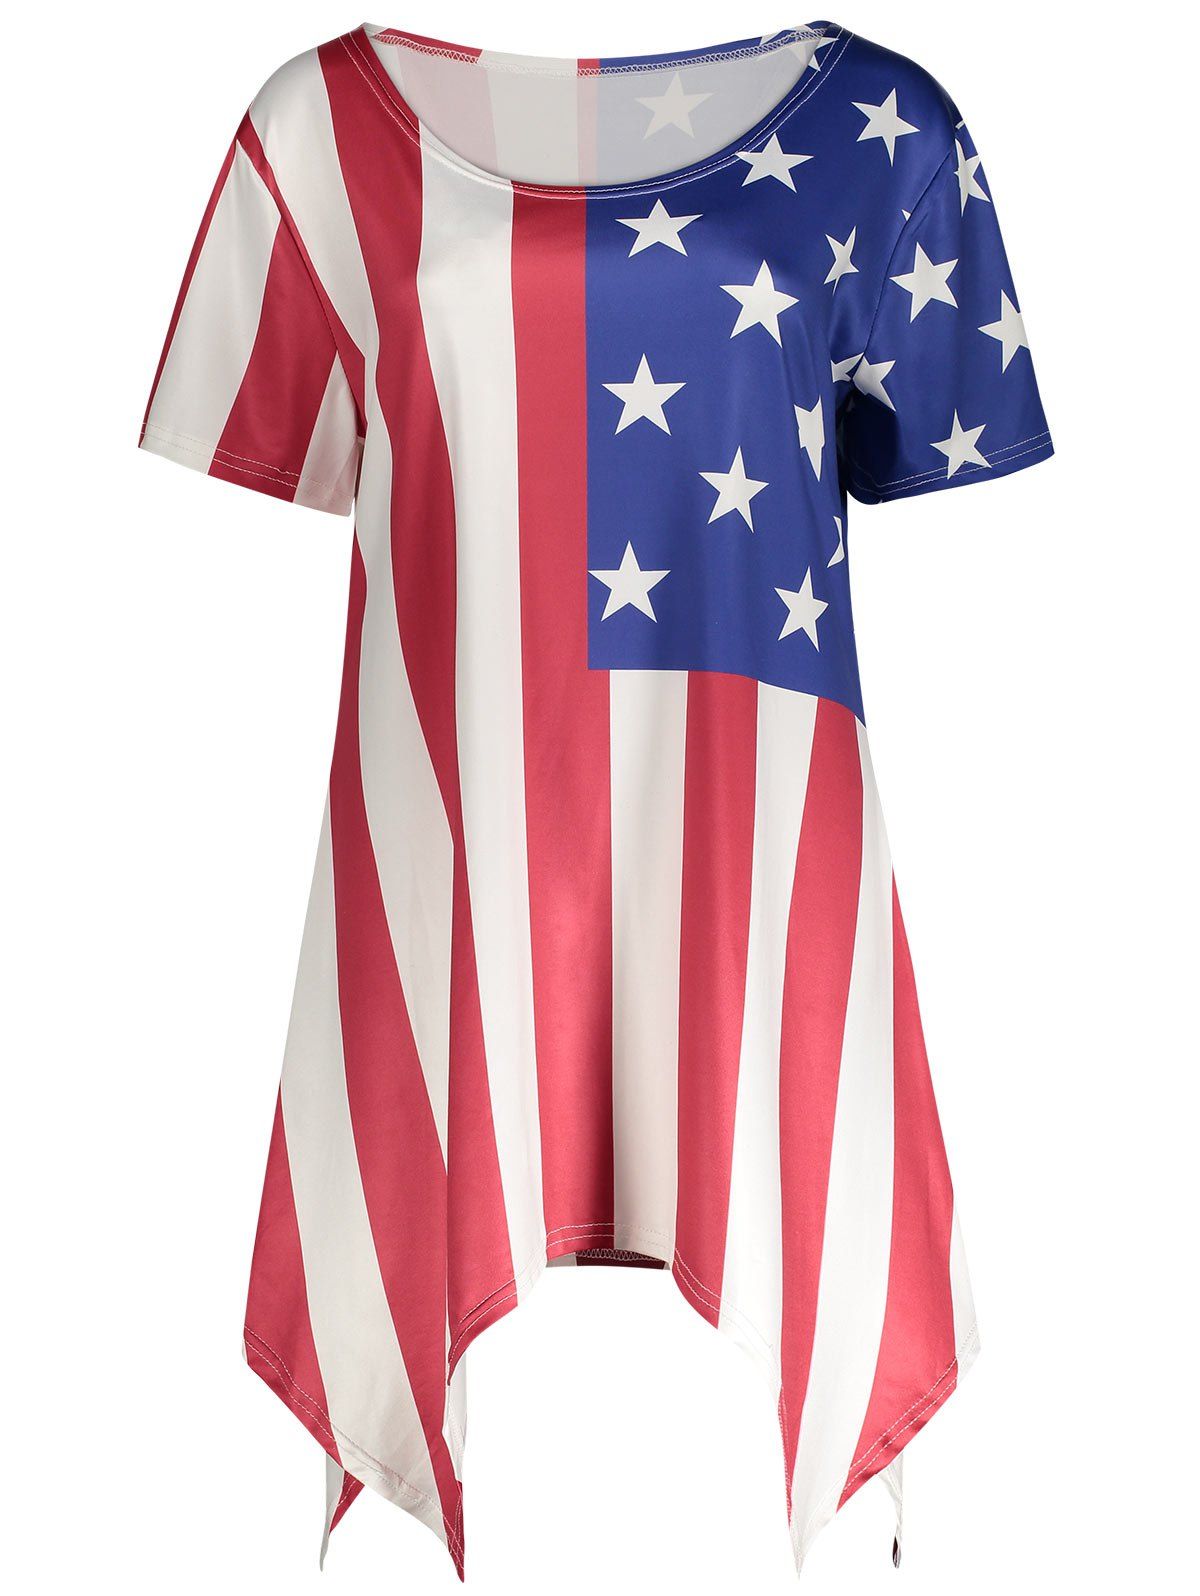 [17% OFF] 2021 Asymmetric American Flag Print Plus Size Top In ...